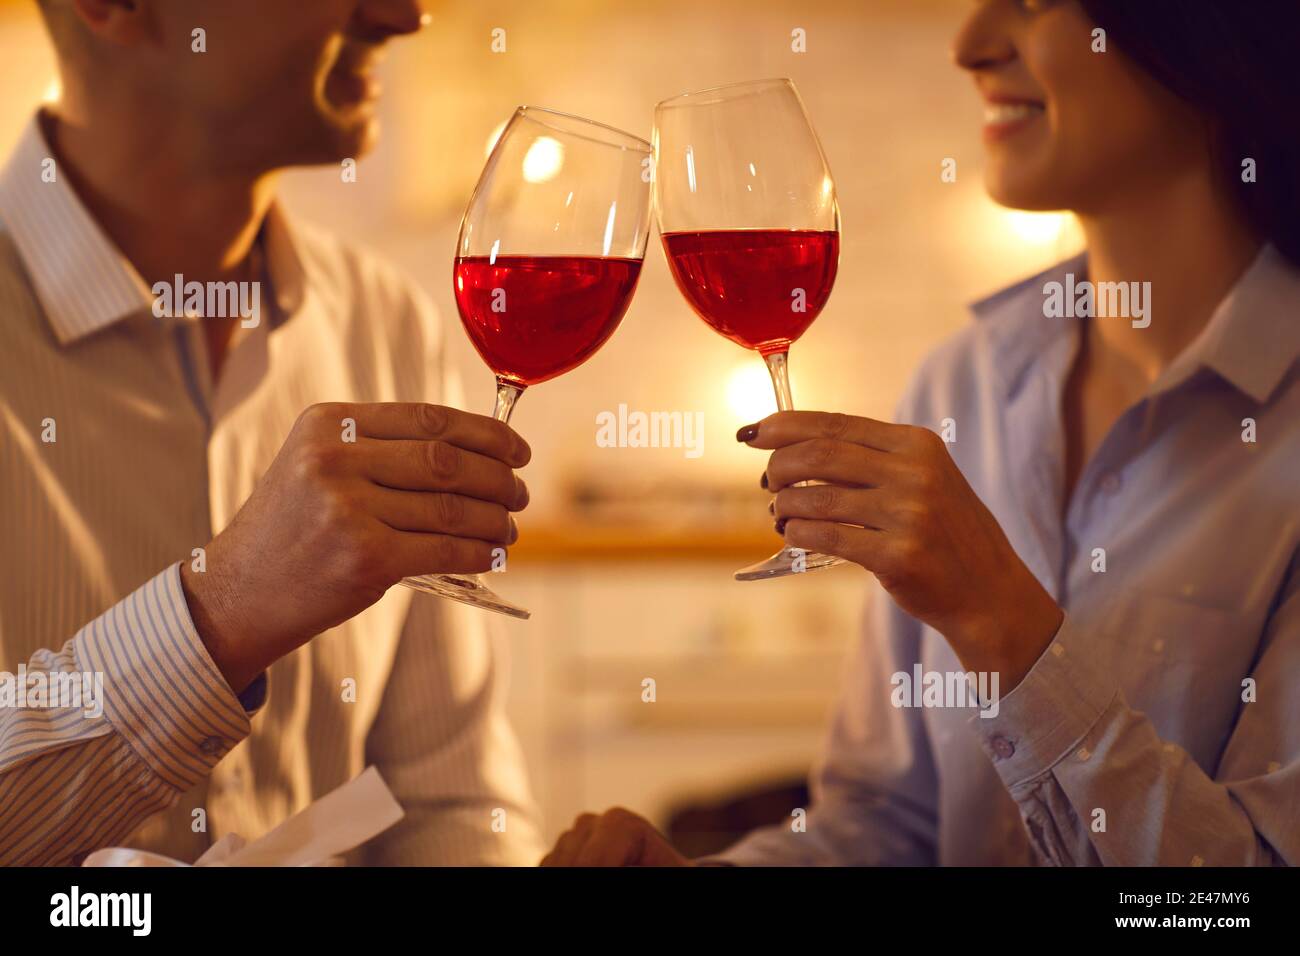 Man and woman in love enjoying red wine and clinking glasses on romantic evening at home Stock Photo